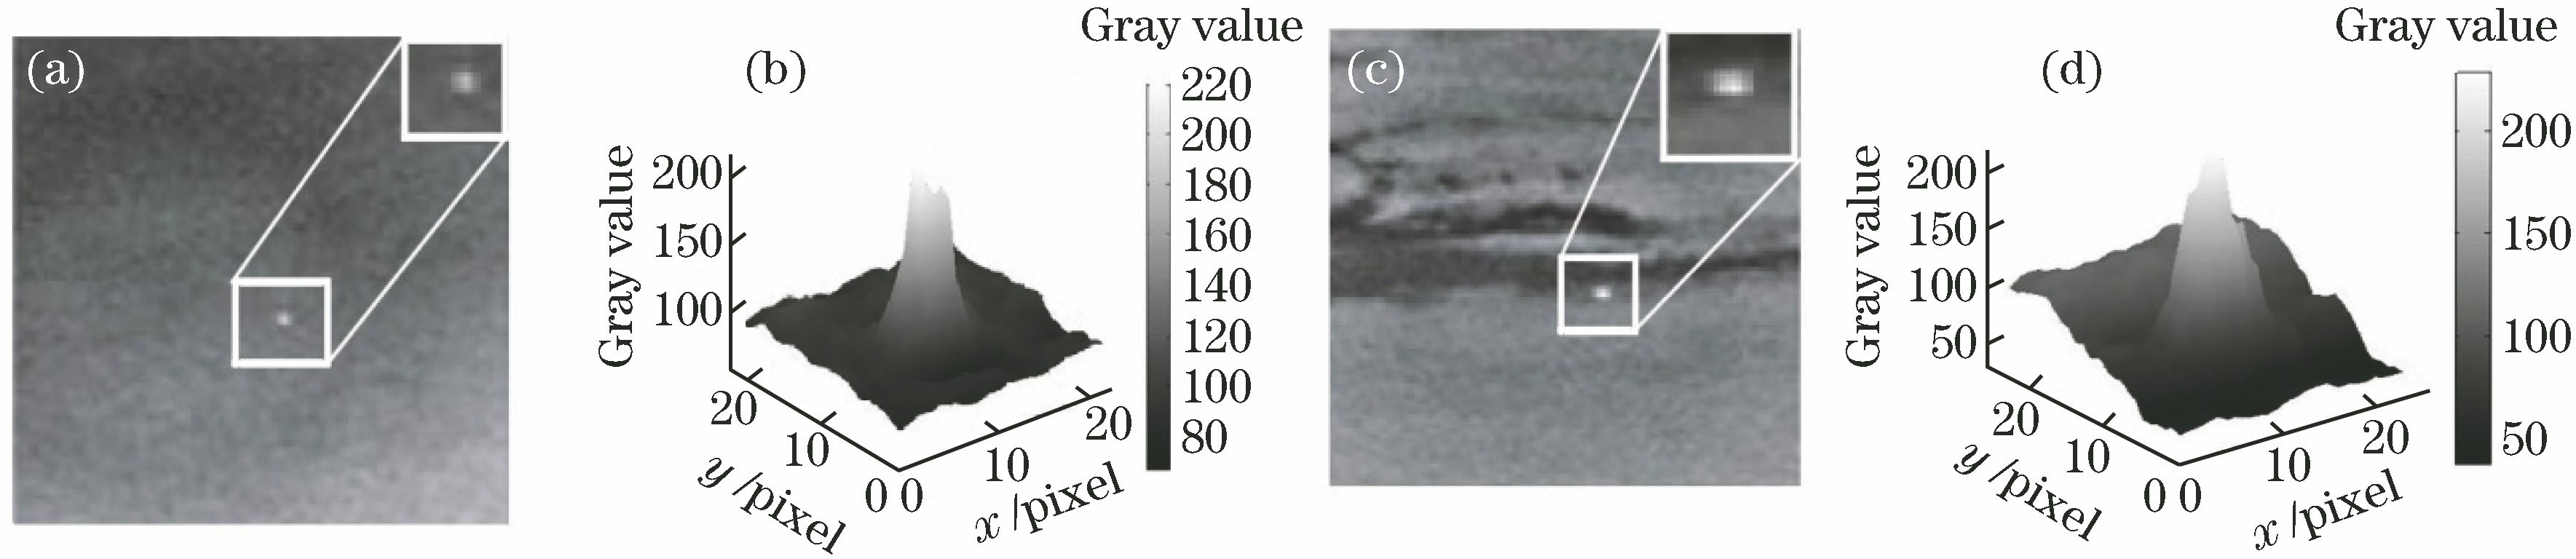 Infrared images and three-dimensional (3D) intensity distributions. (a) Actual infrared image 1 containing small target; (b) 3D intensity distribution in small target area of image 1; (c) actual infrared image 2 containing small target; (d) 3D intensity distribution in small target area of image 2